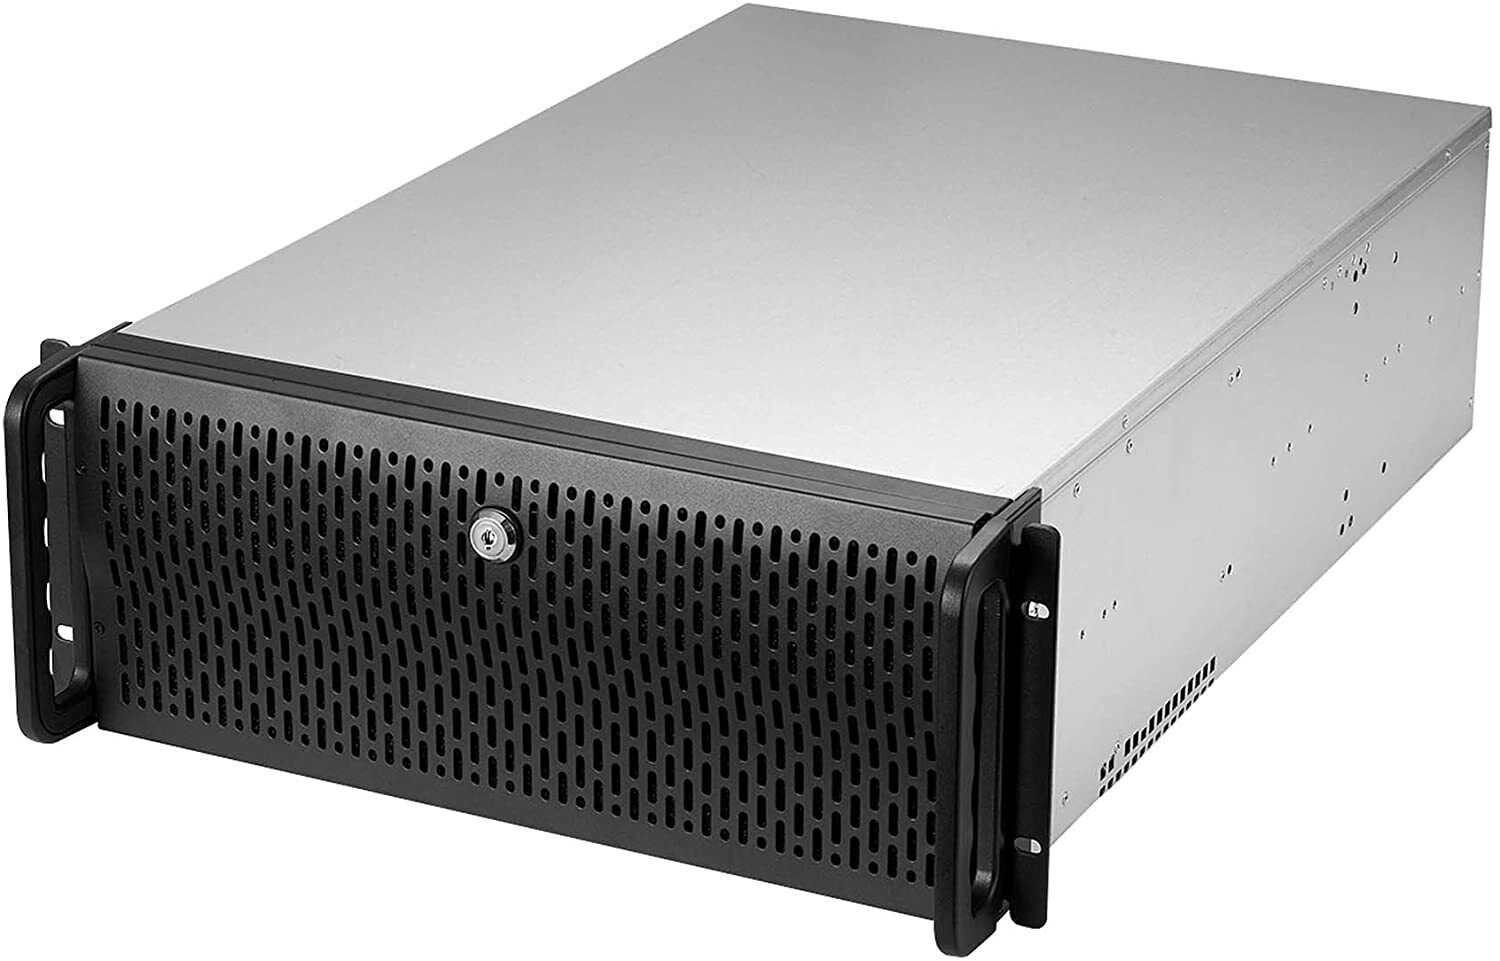 Rosewill RSV-L4000U Server Chassis Rackmount Case 8x 3.5 Bays, 3x 5.25 Devices